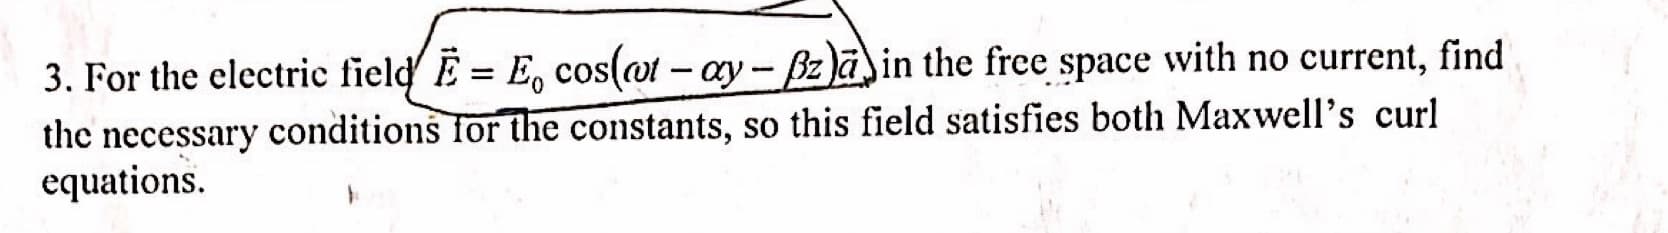 3. For the electric field' E = E, cos(ot - ay - Bzain the free space with no current, find
the necessary conditions for the constants, so this field satisfies both Maxwell's curl
equations
